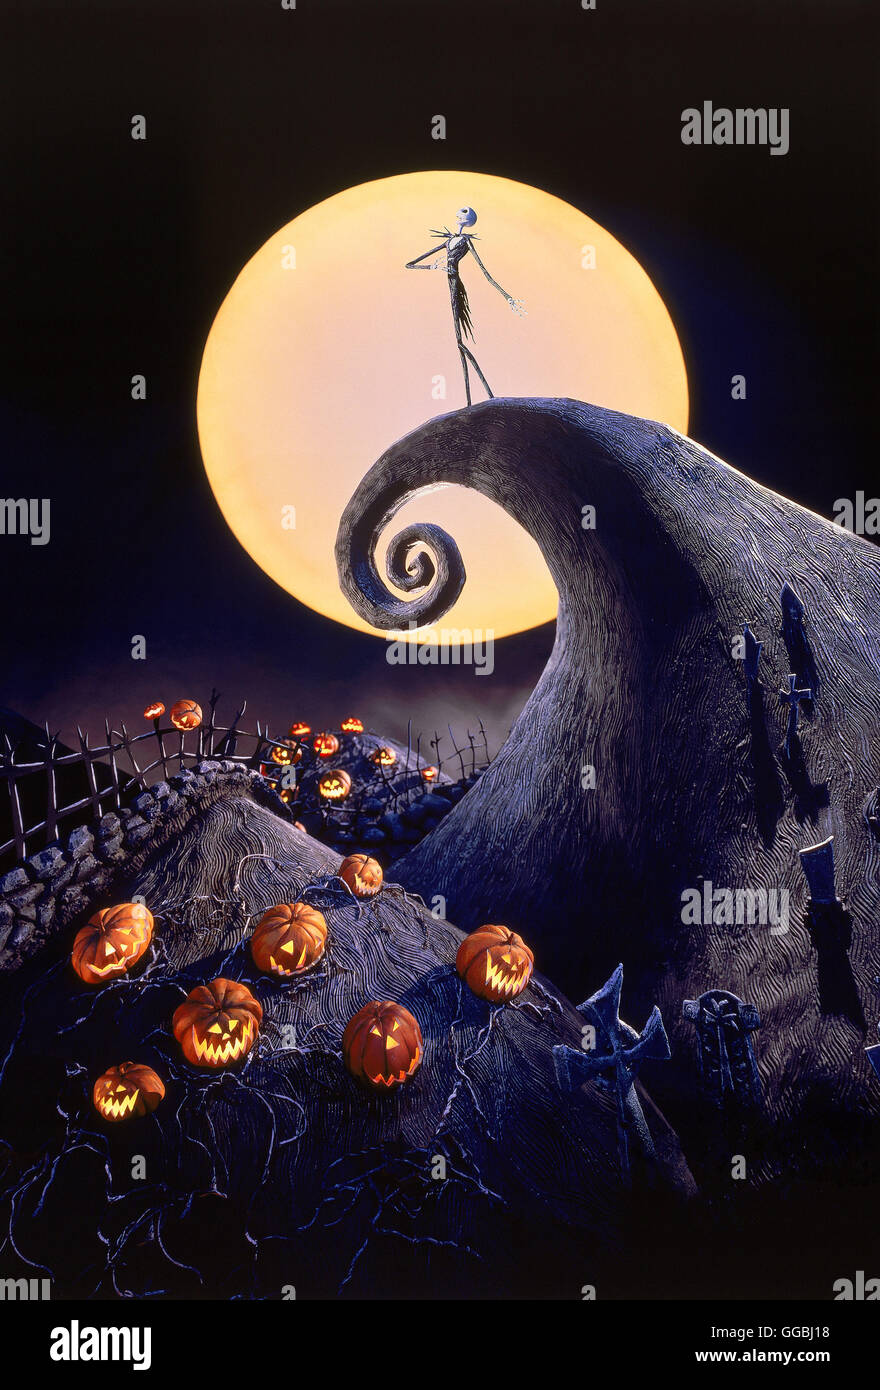 Nightmare before Christmas 3D / Tim Burton's holiday classic, THE NIGHTMARE BEFORE CHRISTMAS, makes a return to the big screen this holiday season in stunning Disney Digital 3D Jack Skellington, King of Halloweentown Regie: Henry Selick aka. The Nightmare before Christmas 3D Stock Photo